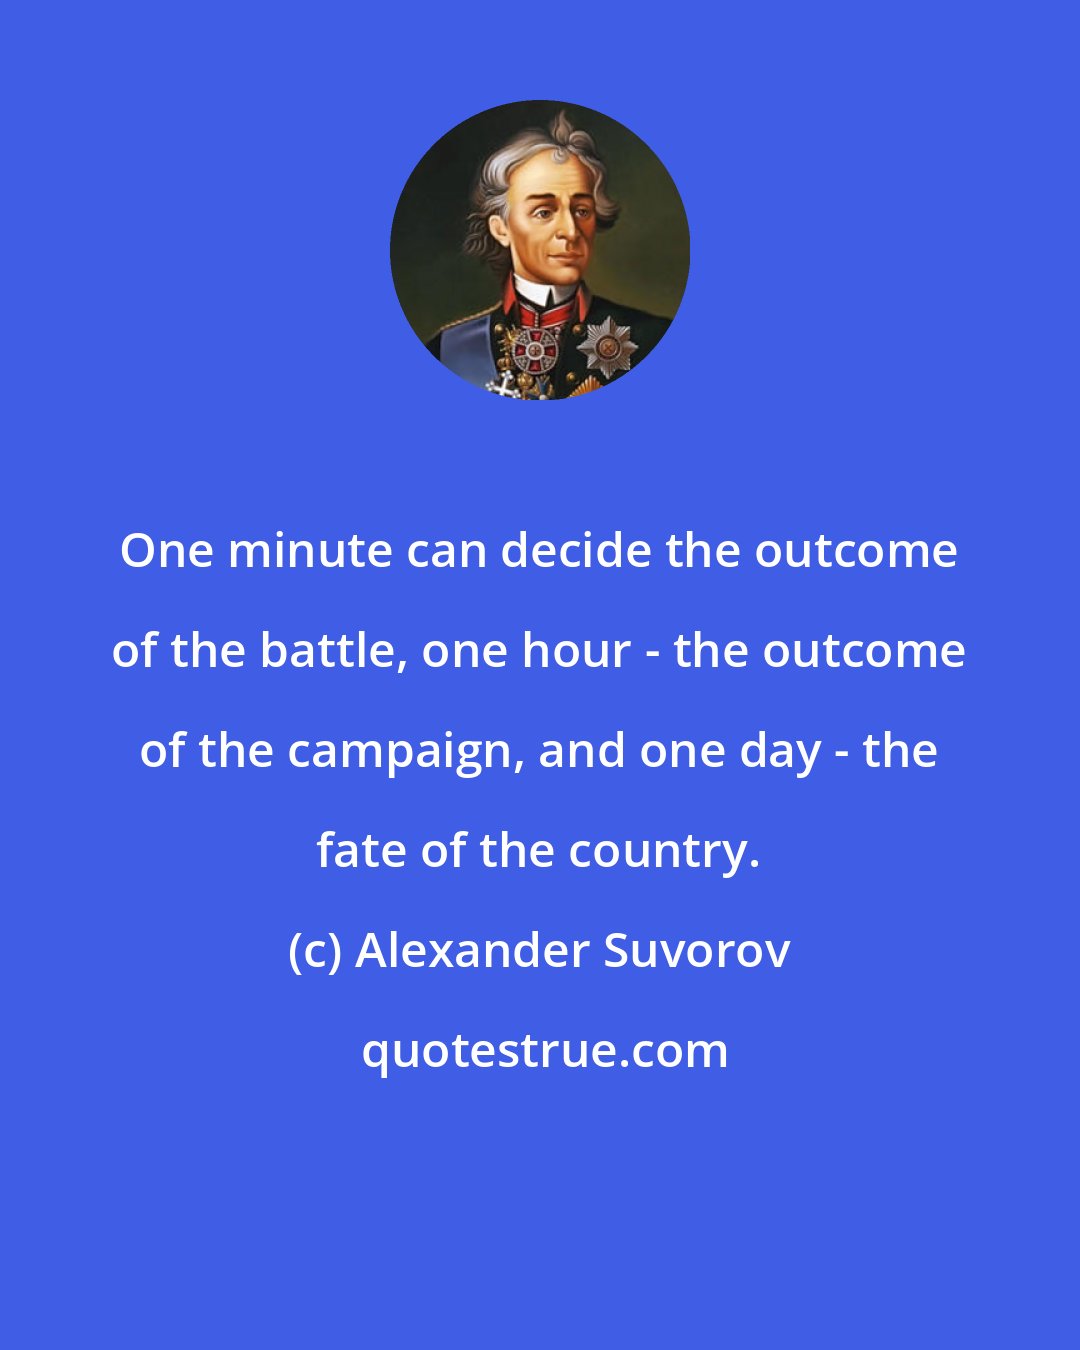 Alexander Suvorov: One minute can decide the outcome of the battle, one hour - the outcome of the campaign, and one day - the fate of the country.